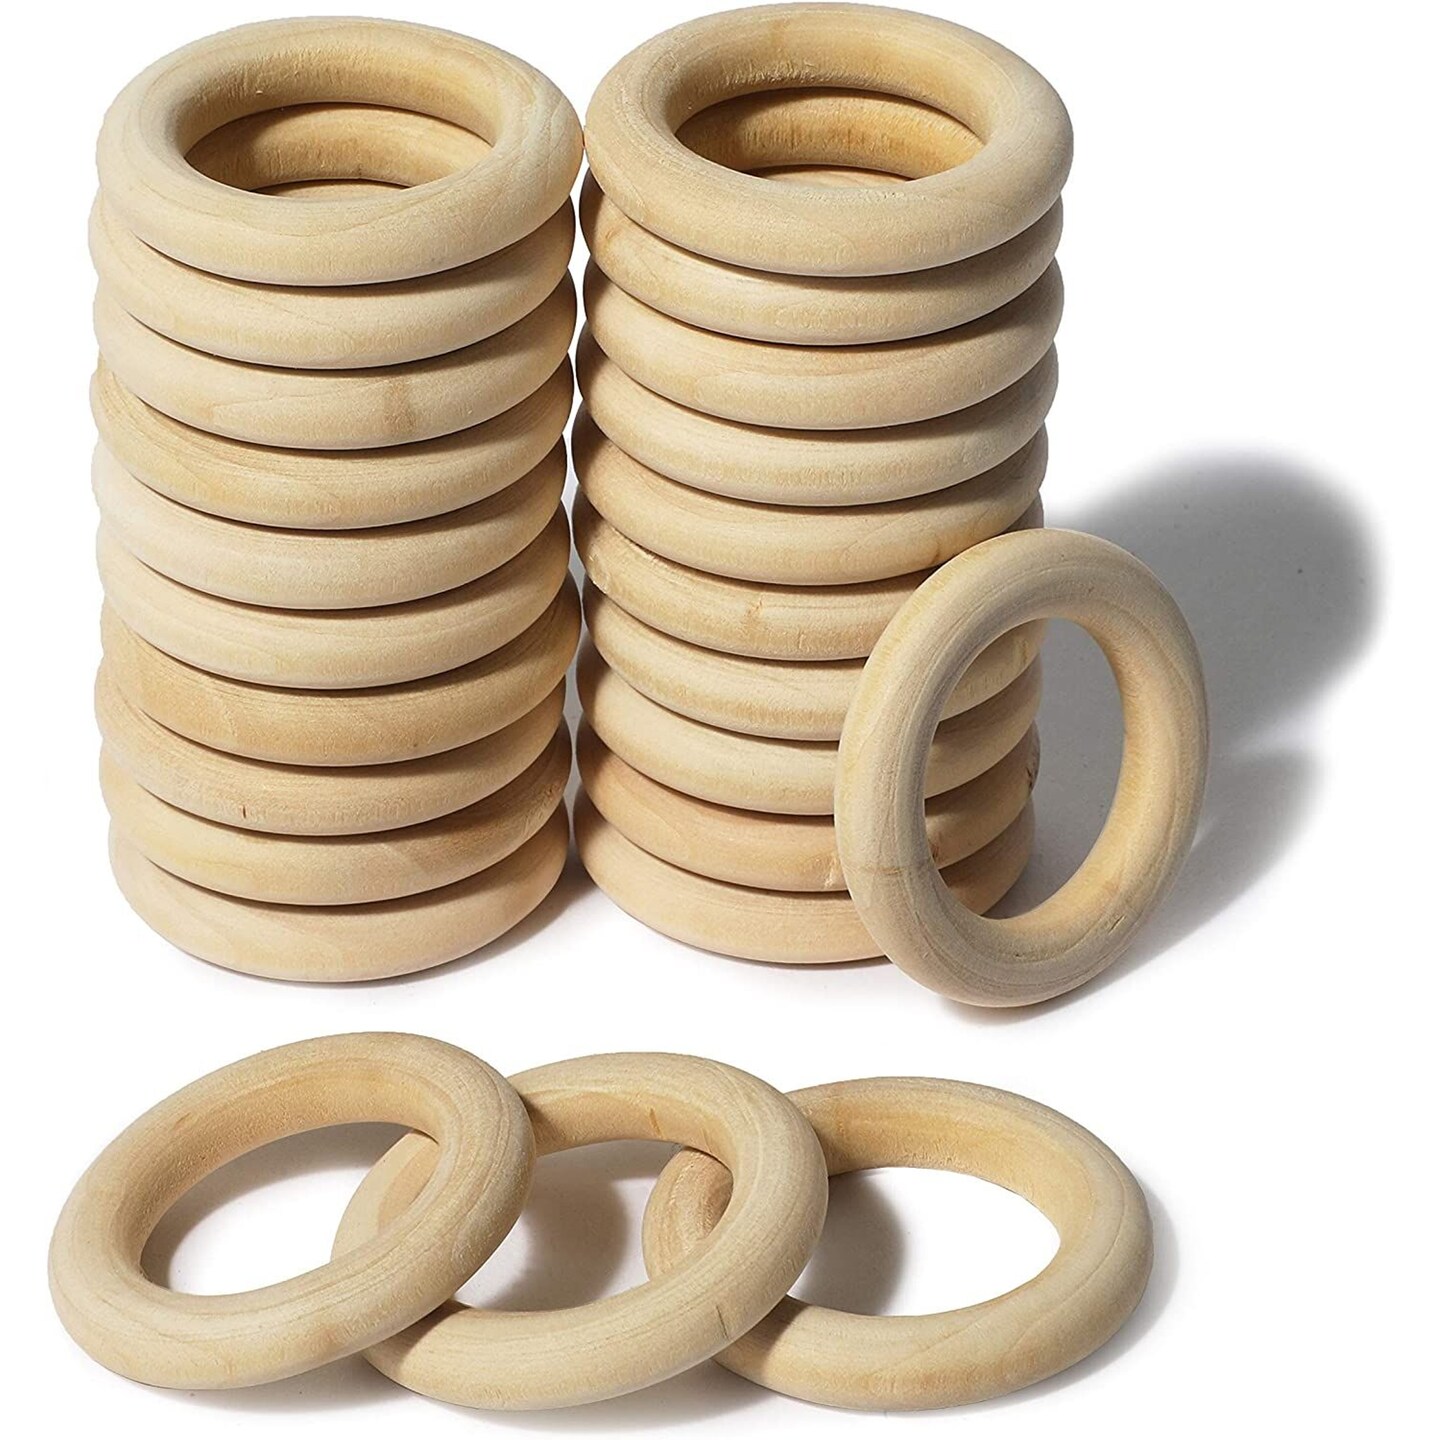 60Pcs Wooden Rings Wooden Rings for Crafts Baby Wood Ring Wood Ring Wood  for Craft DIY Craft Ring Pendant and Connector Piece Jewelry Making for  Home